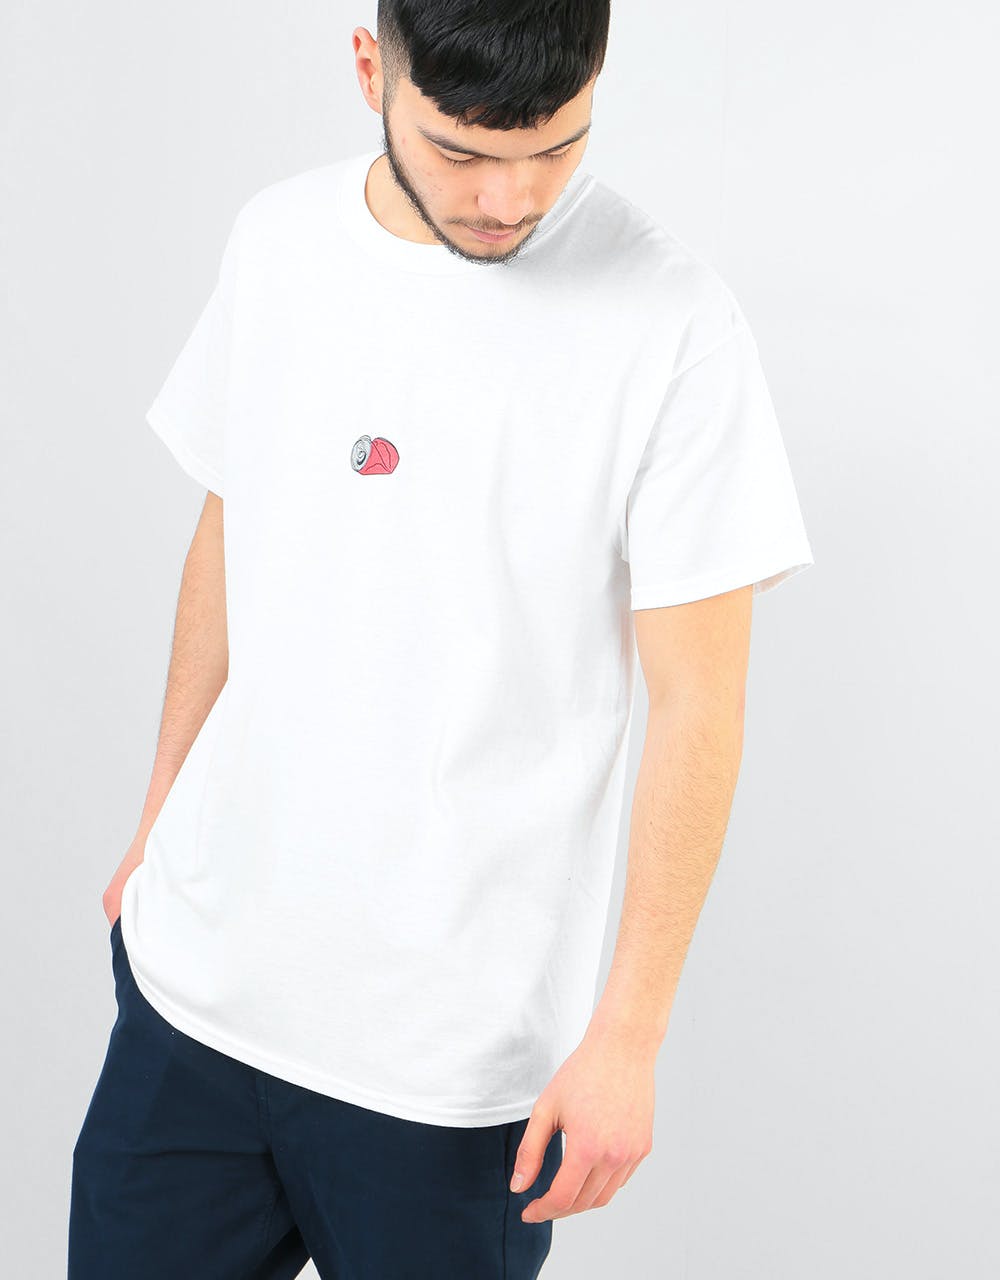 Route One Beers T-Shirt - White